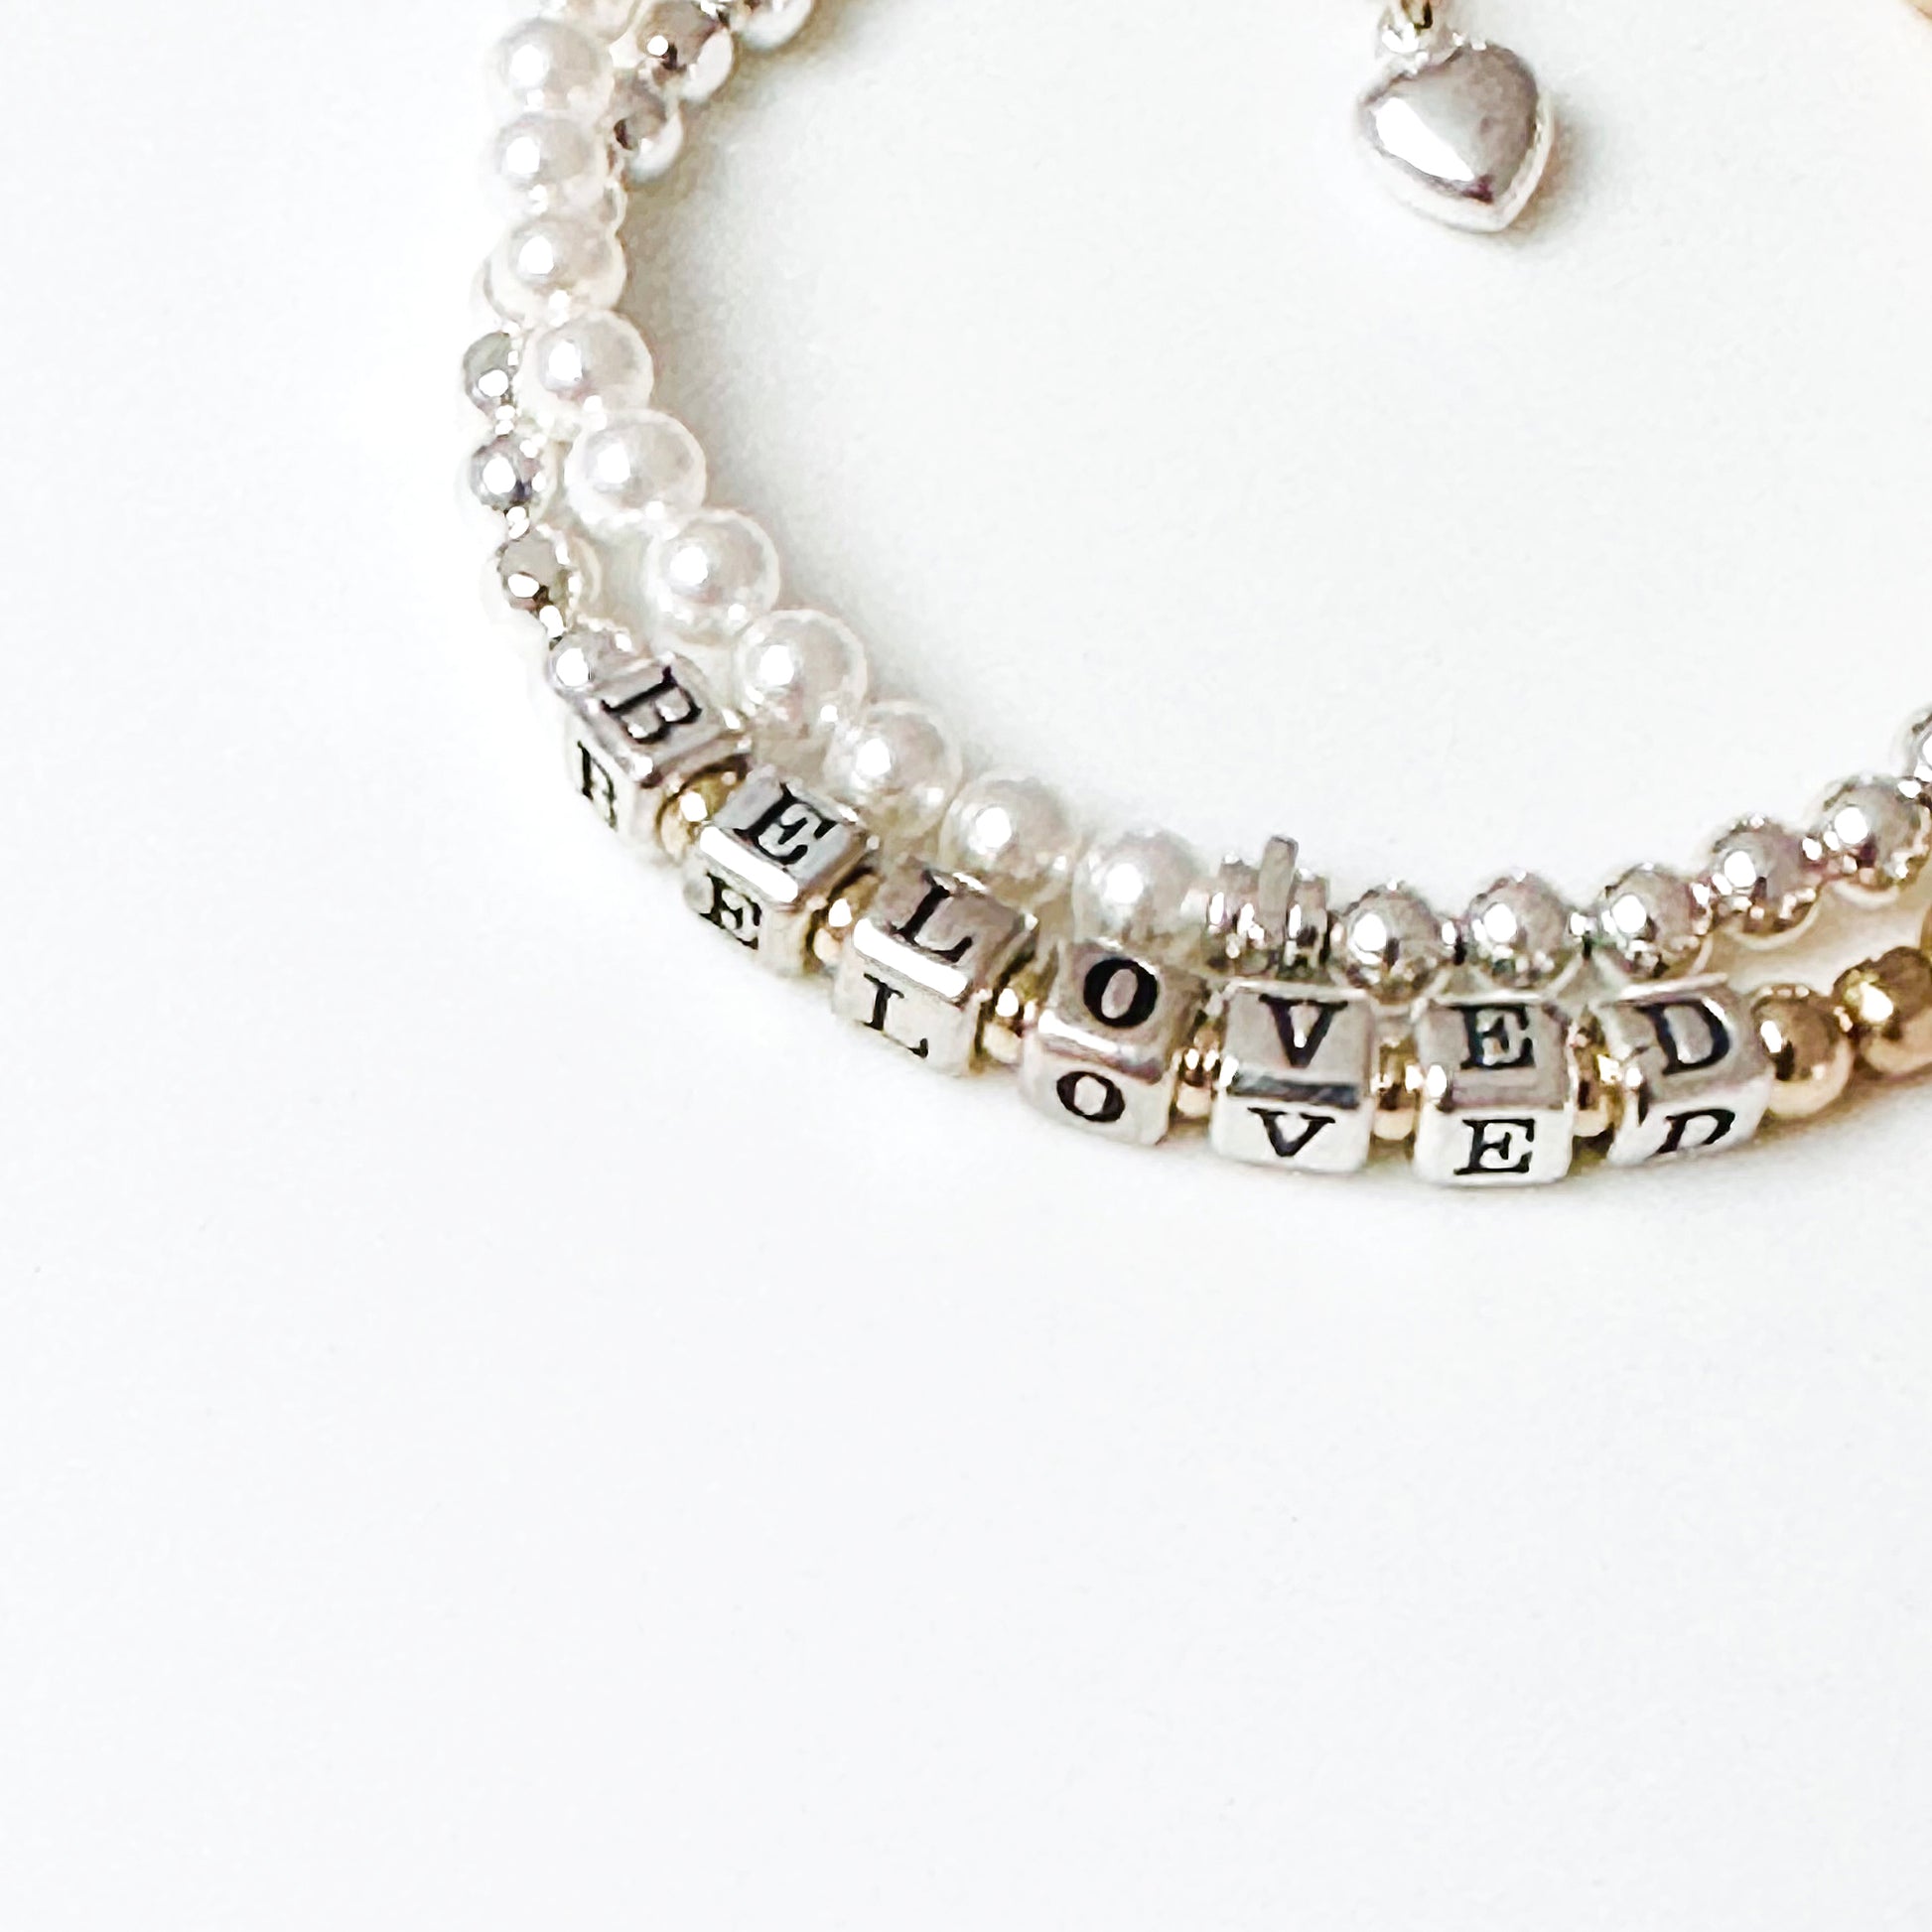 Beloved Mother's Day Bracelet in sterling silver and 14K gold beads  with beaded stacking bracelets in sterling silver and 14k gold shown with pearl bracelet and sterling silver heart